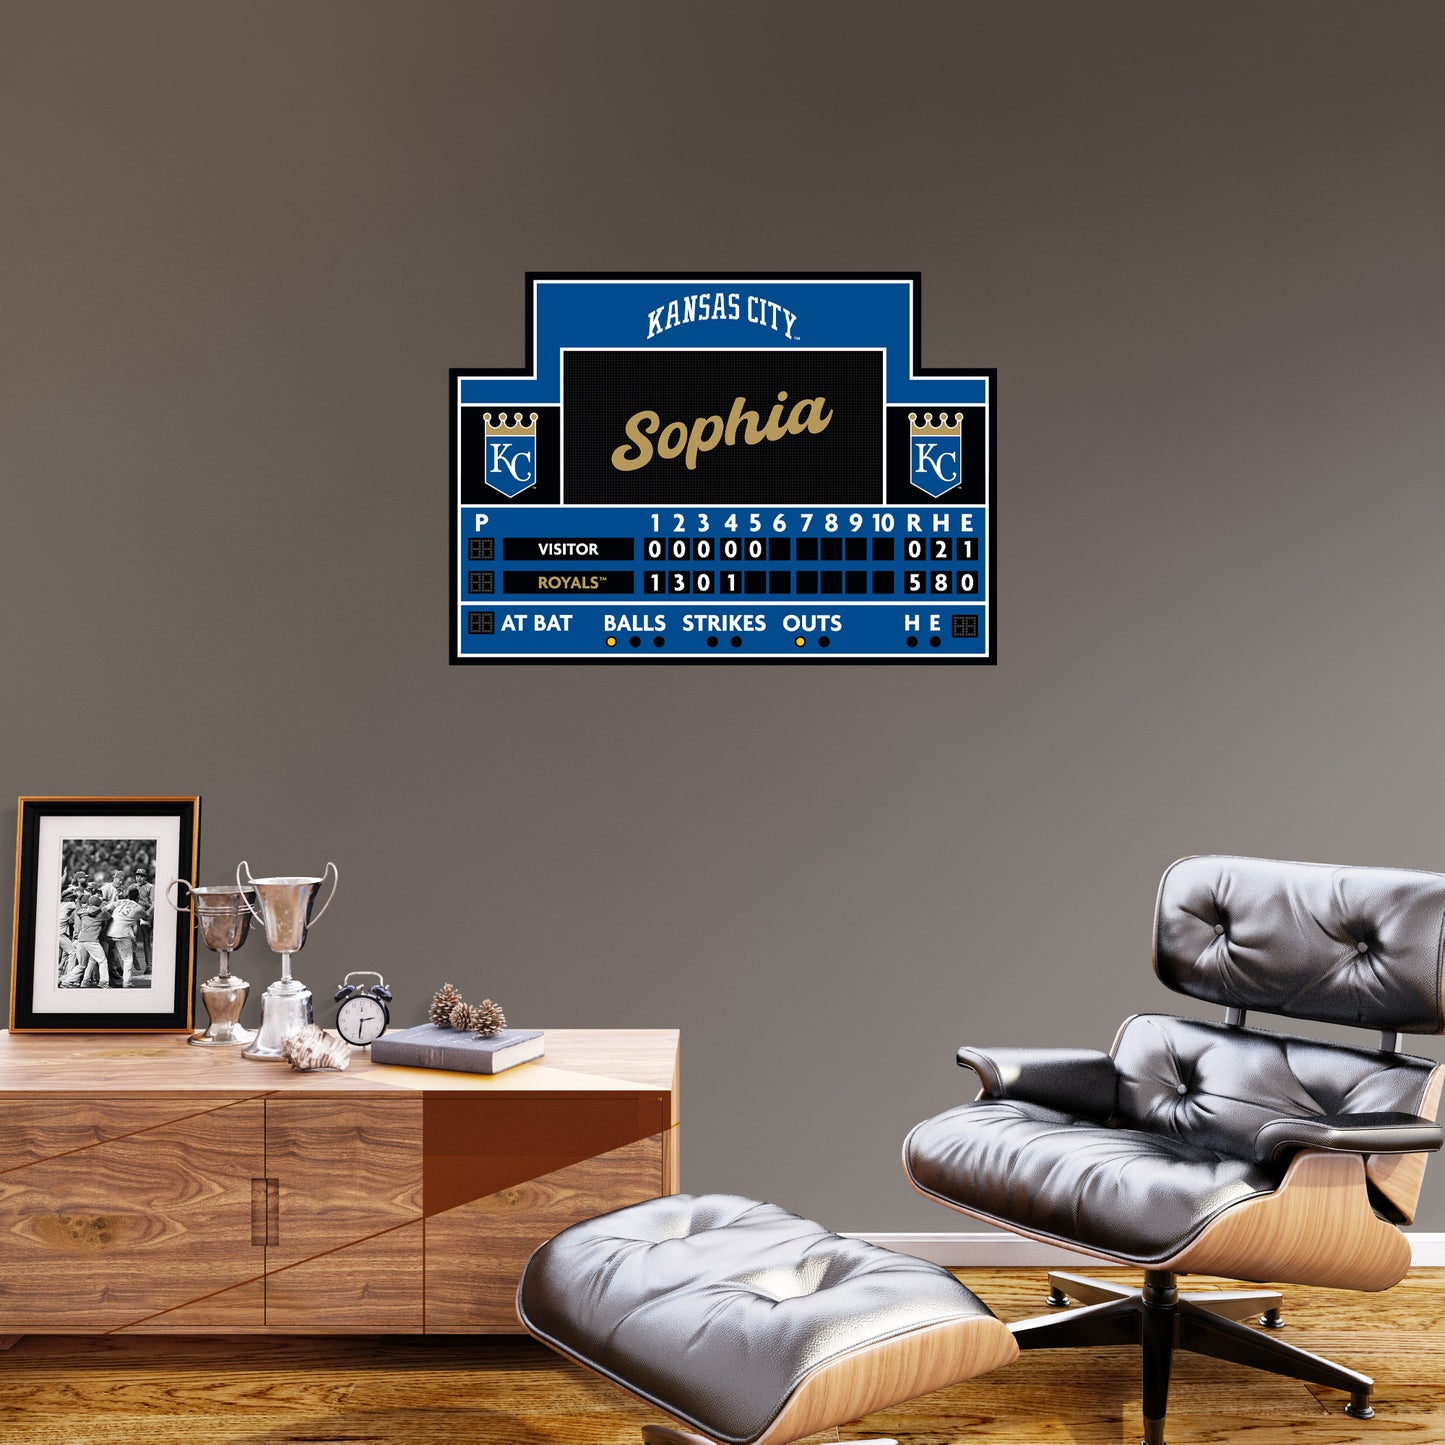 Kansas City Royals: Scoreboard Personalized Name        - Officially Licensed MLB Removable     Adhesive Decal